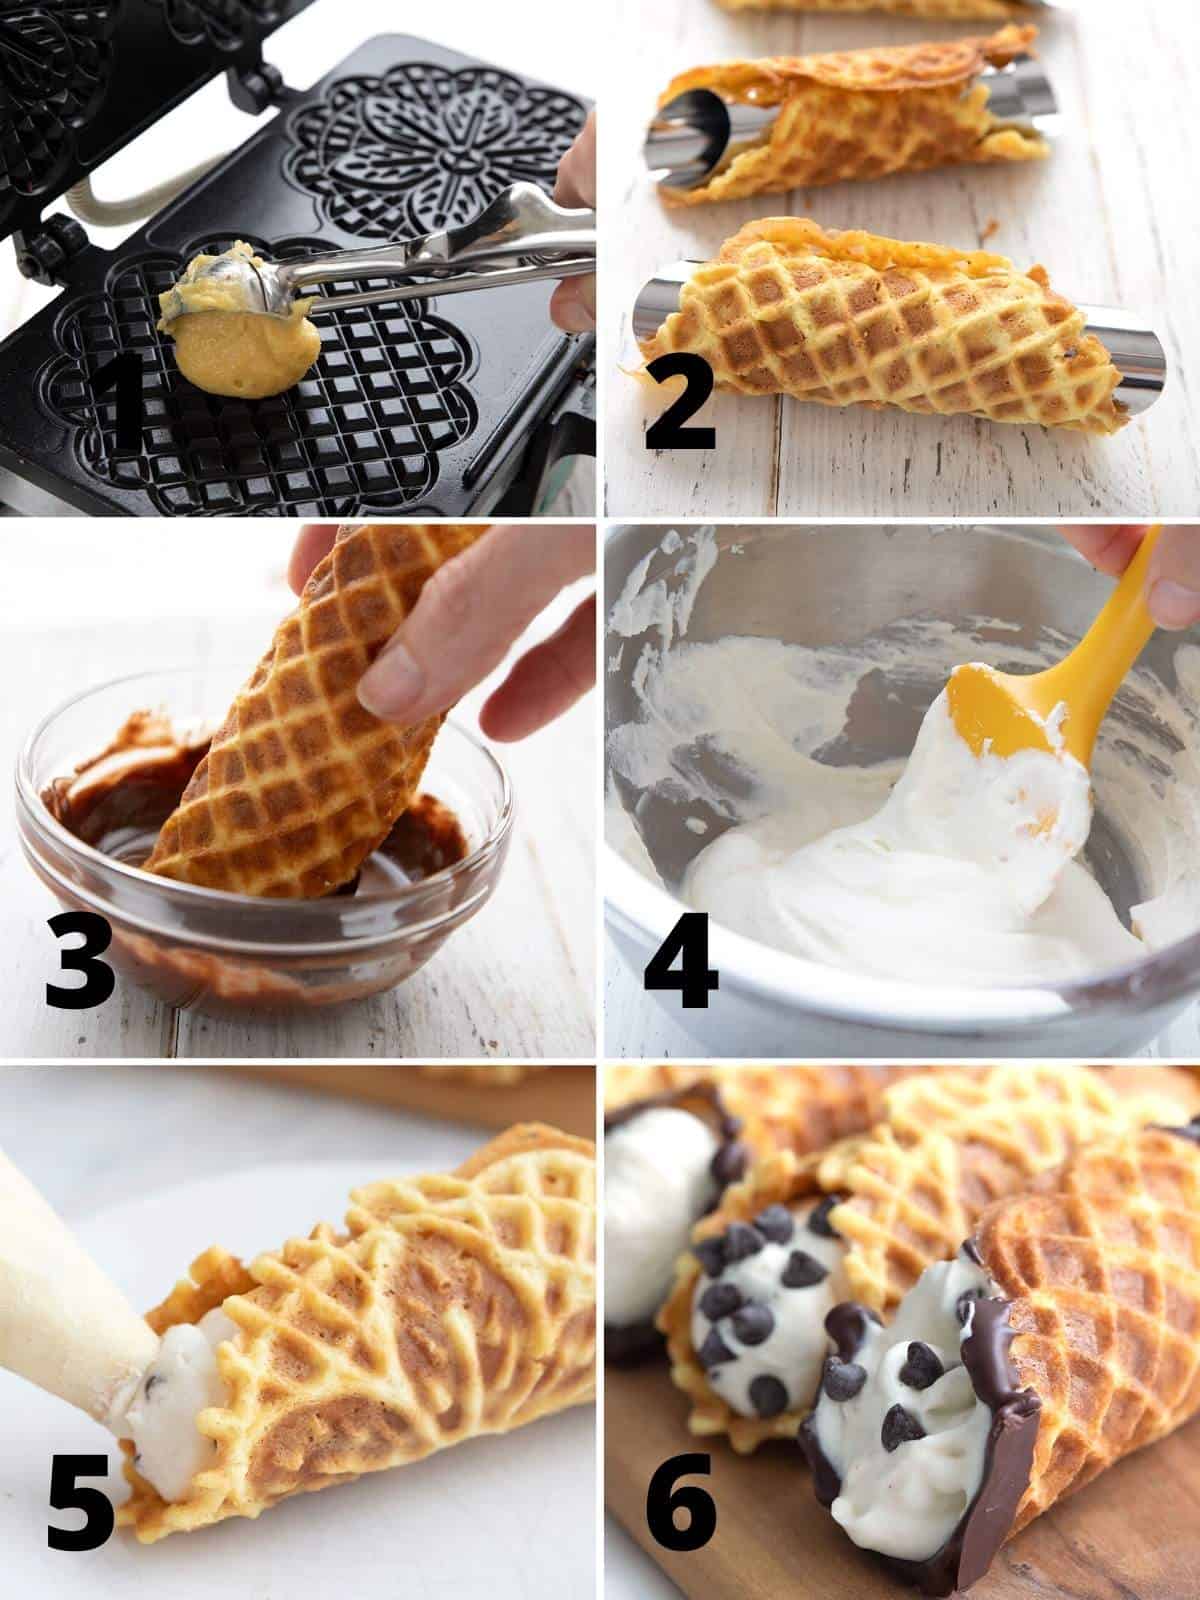 A collage of 6 images showing how to make Keto Cannoli.